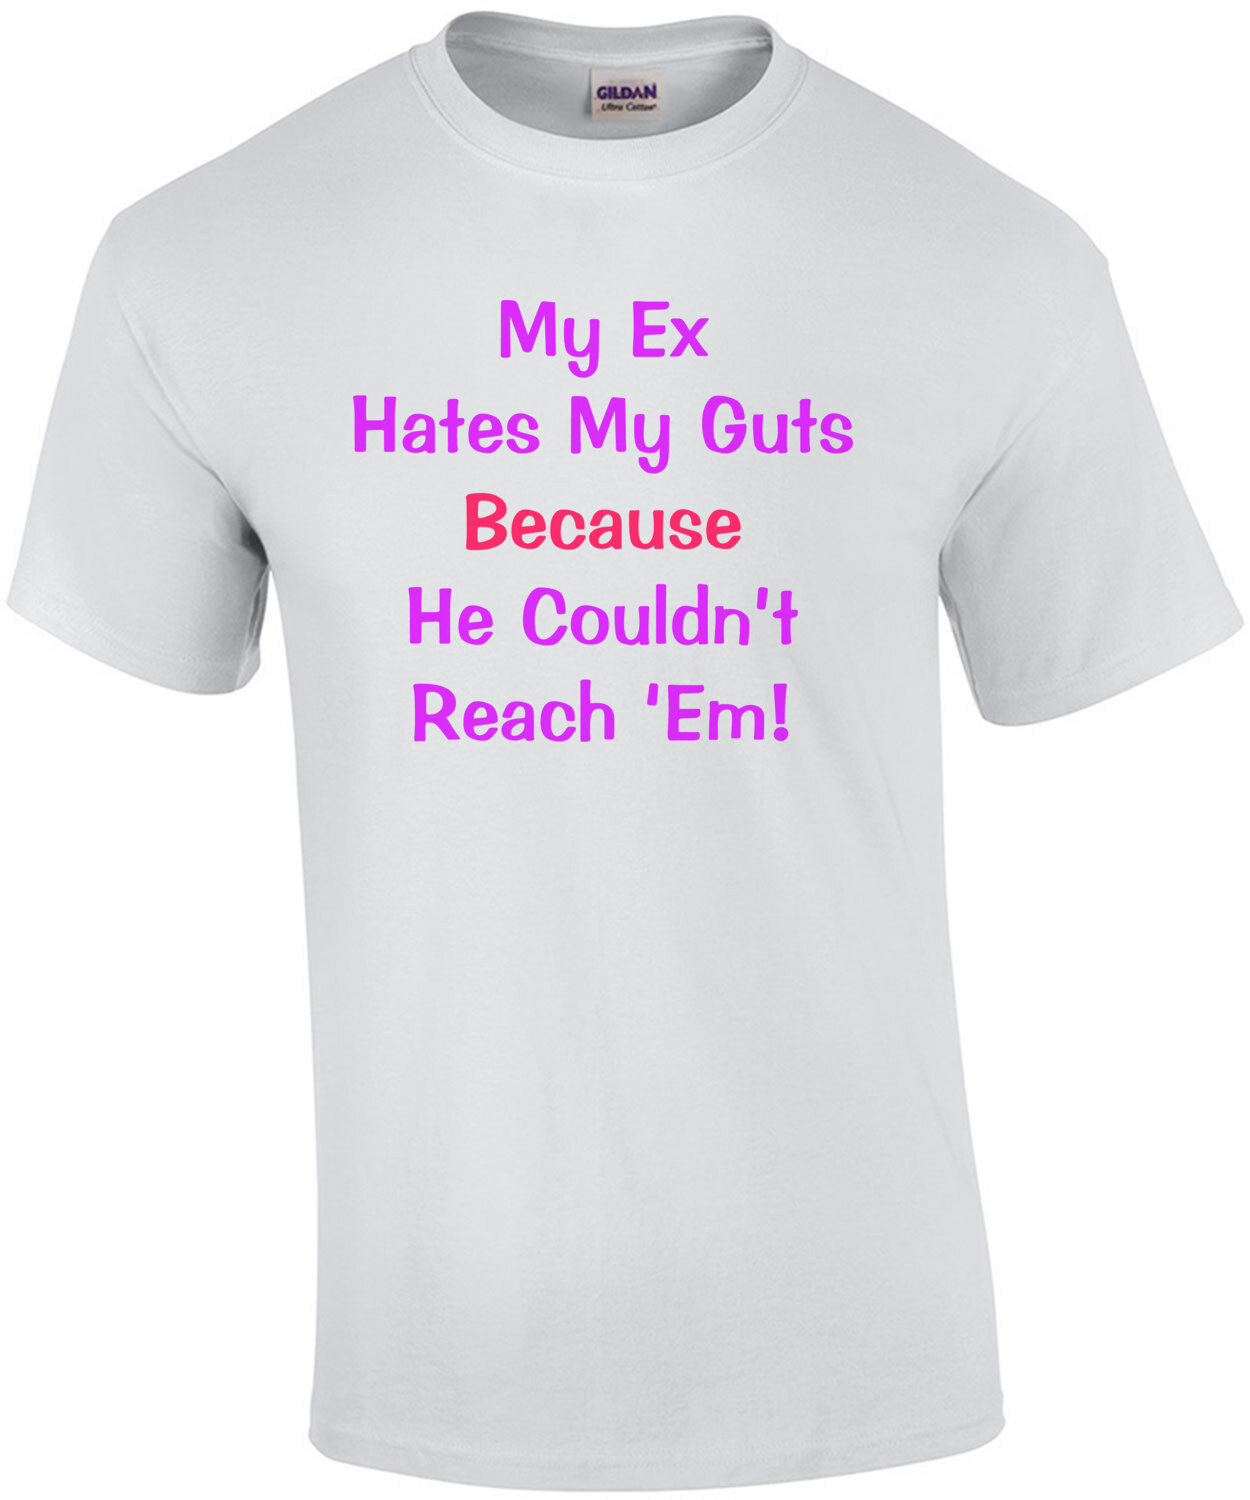 My Ex Hates My Guts Because He Couldn't Reach 'Em! Funny Offensive Ladies Tee